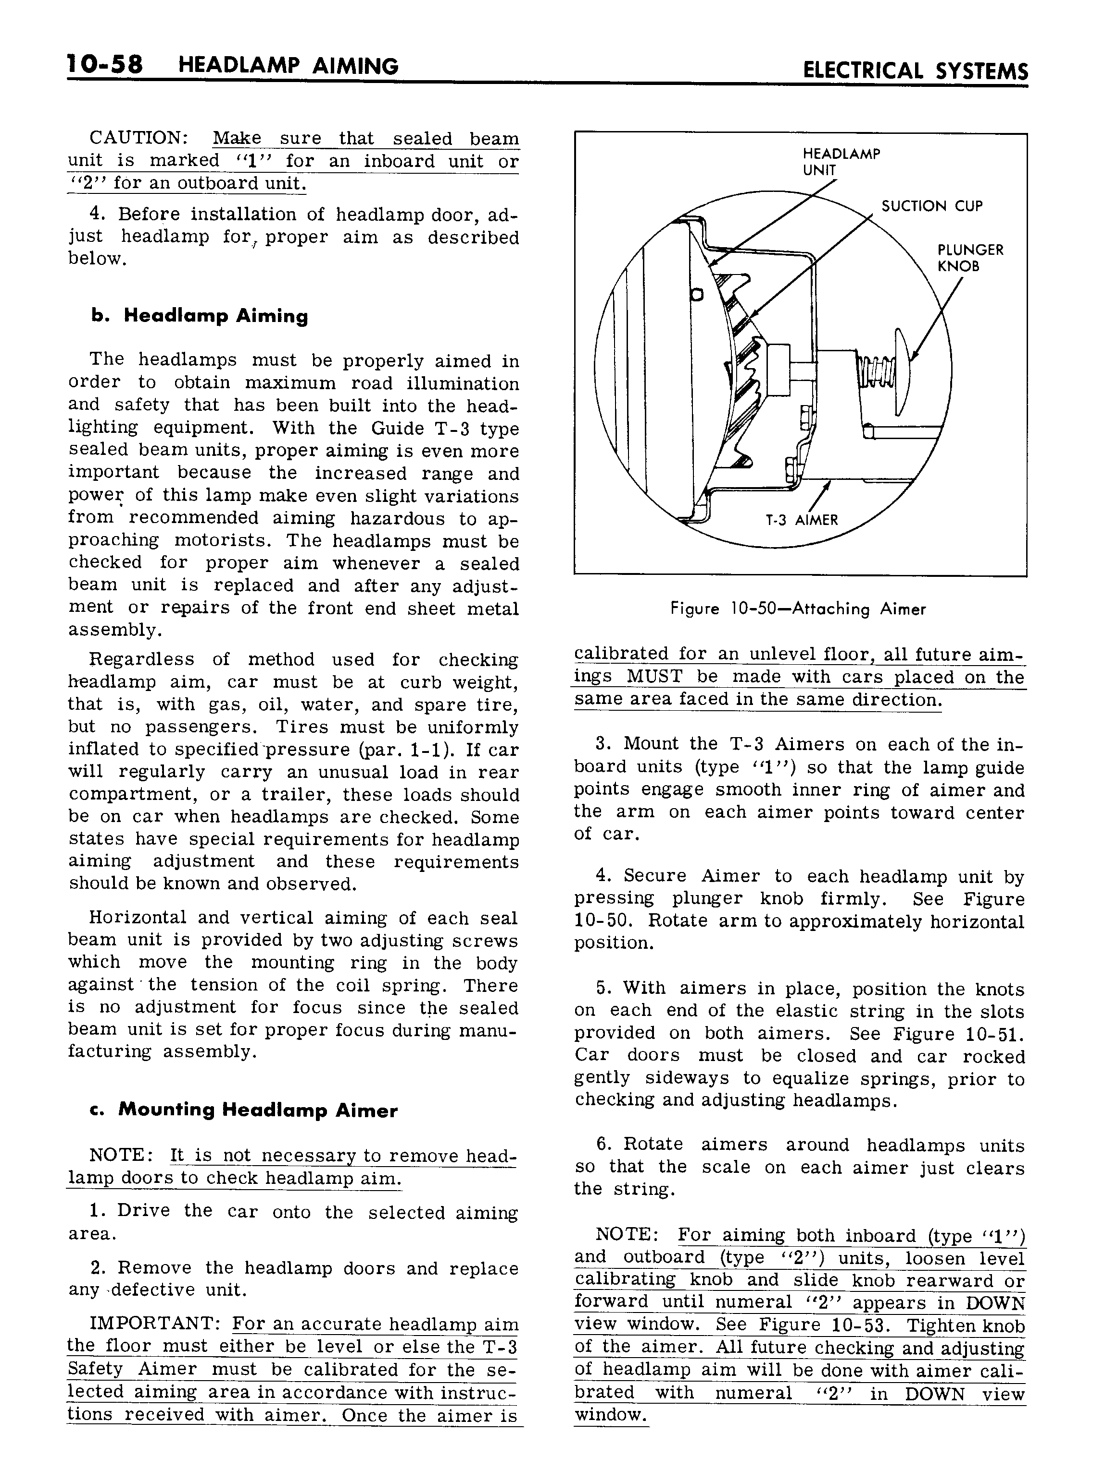 n_10 1961 Buick Shop Manual - Electrical Systems-058-058.jpg